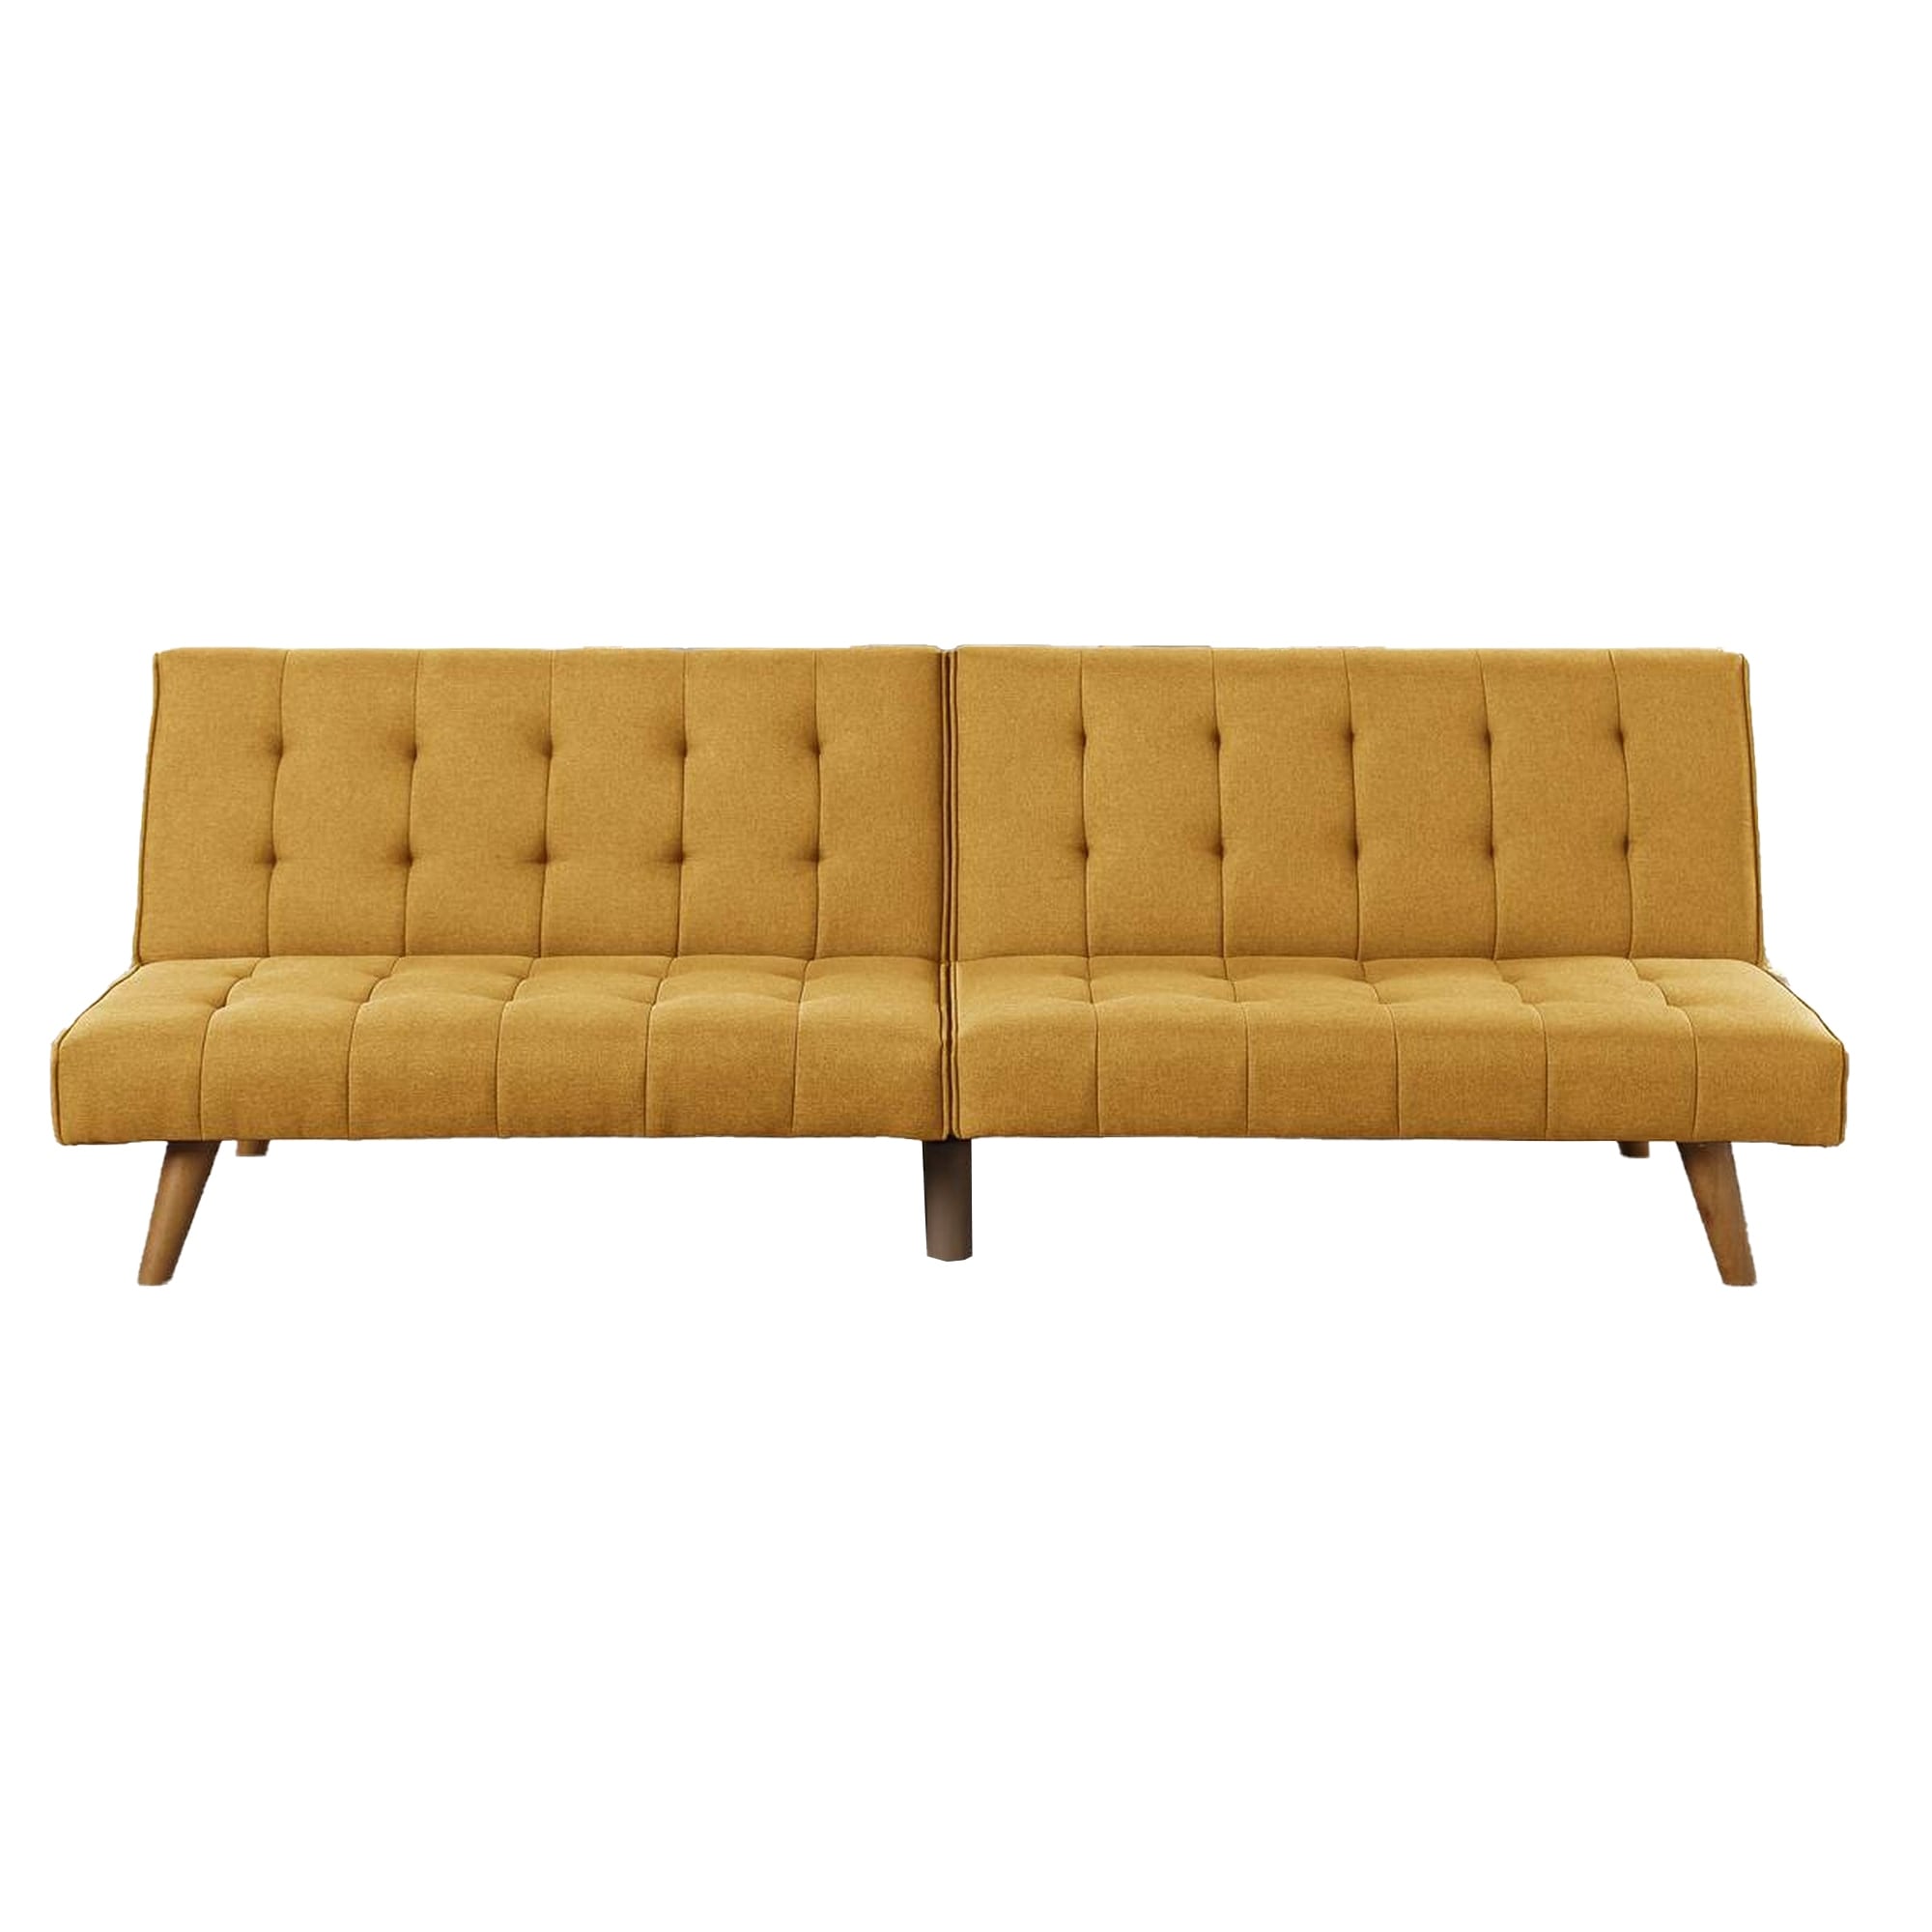 Benjara Fabric Adjustable Sofa with Tufted Details and Splayed Legs, Yellow